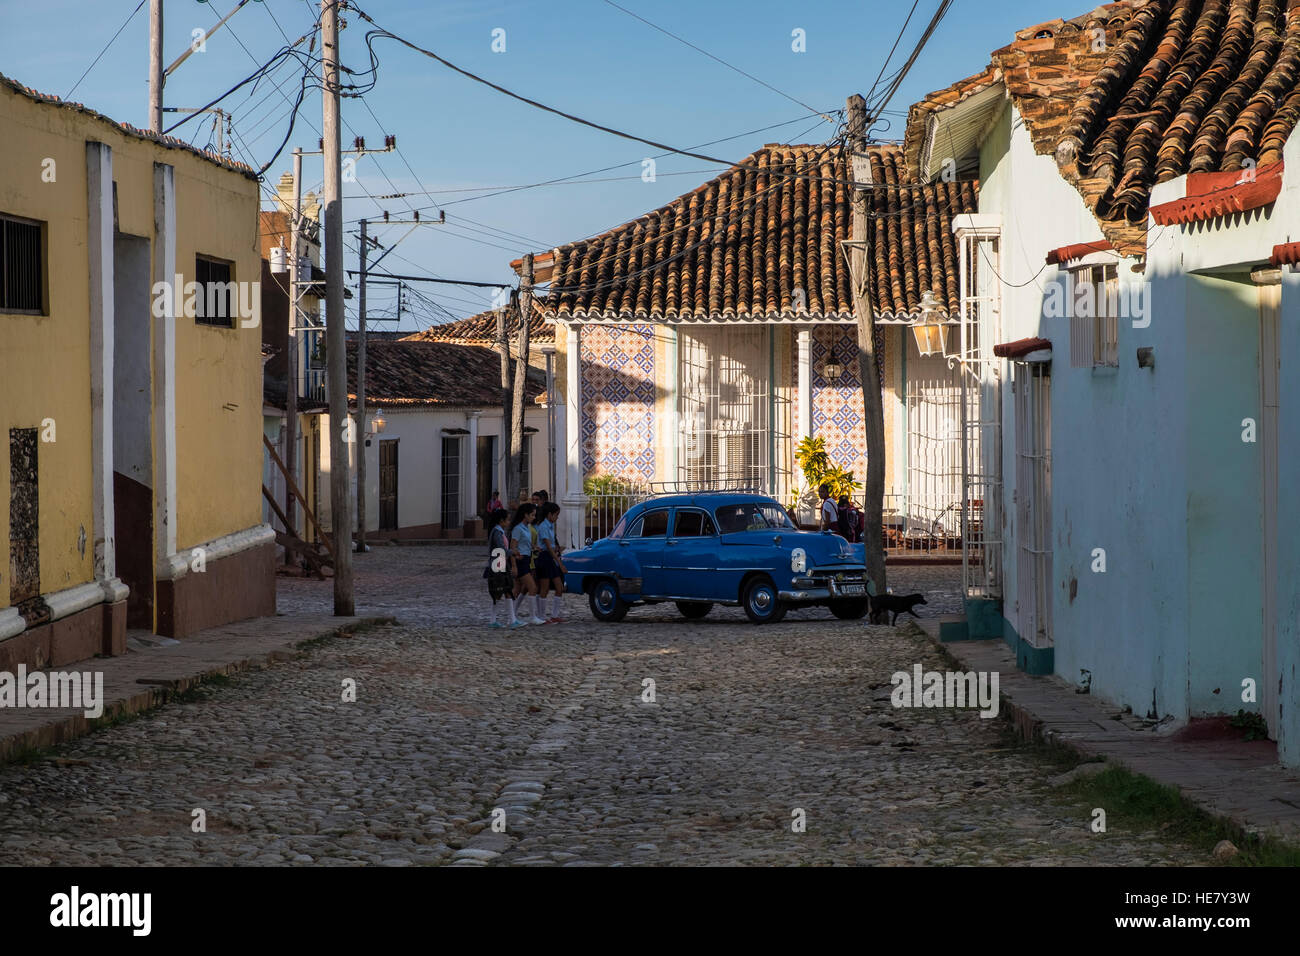 Blue car, american classic 1950s Chevrolet, taxi, crossing junction in Trinidad, Cuba Stock Photo